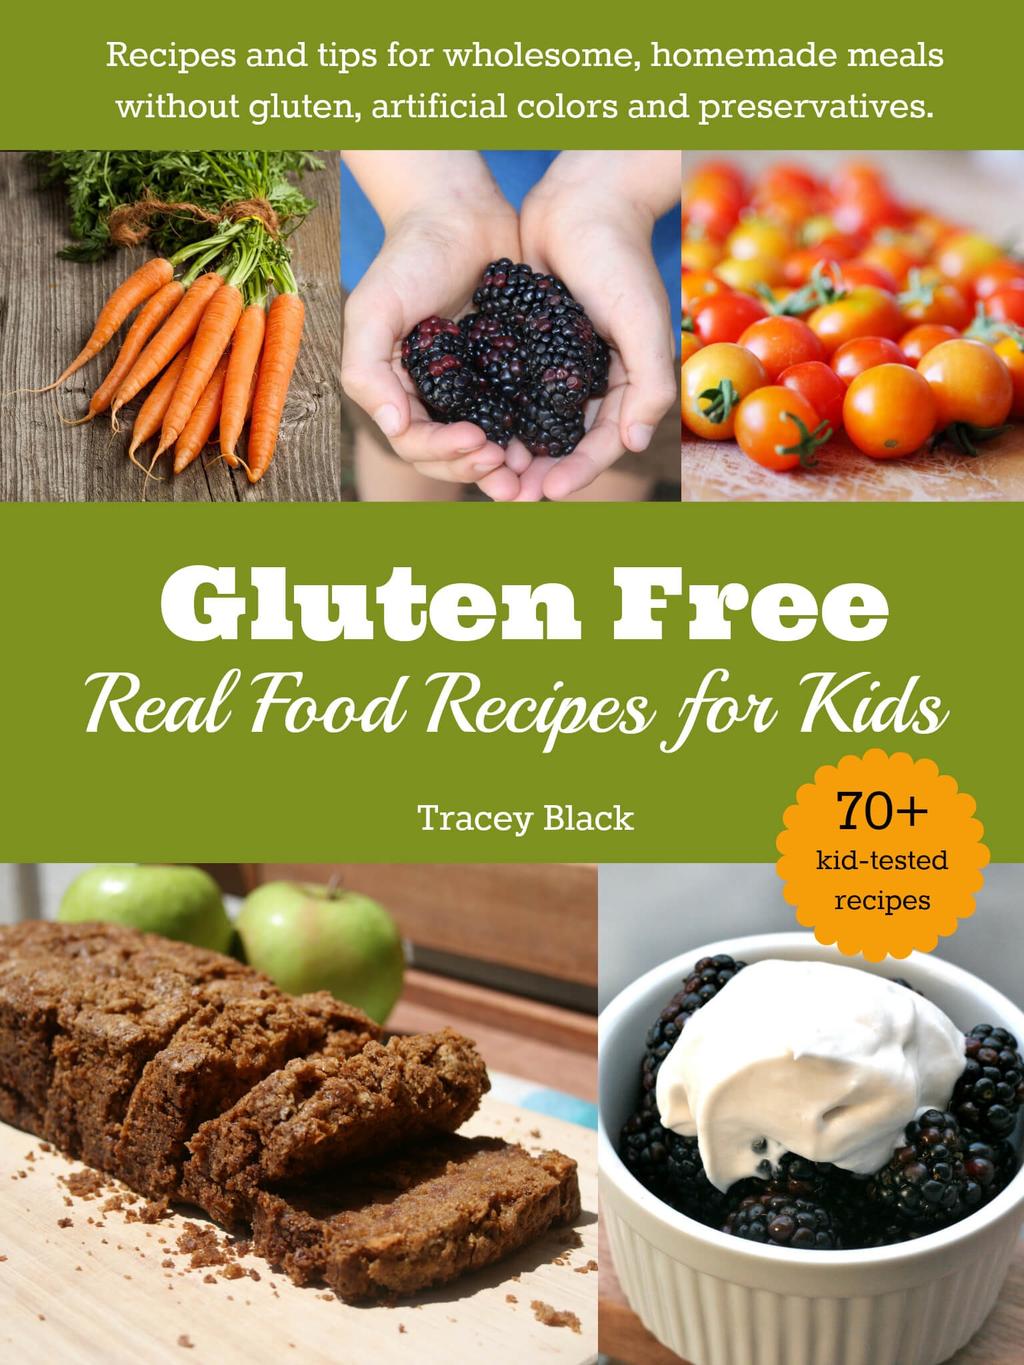 Gluten Free, Real Food Recipes for Kids Thank You Thank you for reading the Real Food Guide. Want more tips and recipes? Check out my full-length book, Gluten Free, Real Food Recipes for Kids.